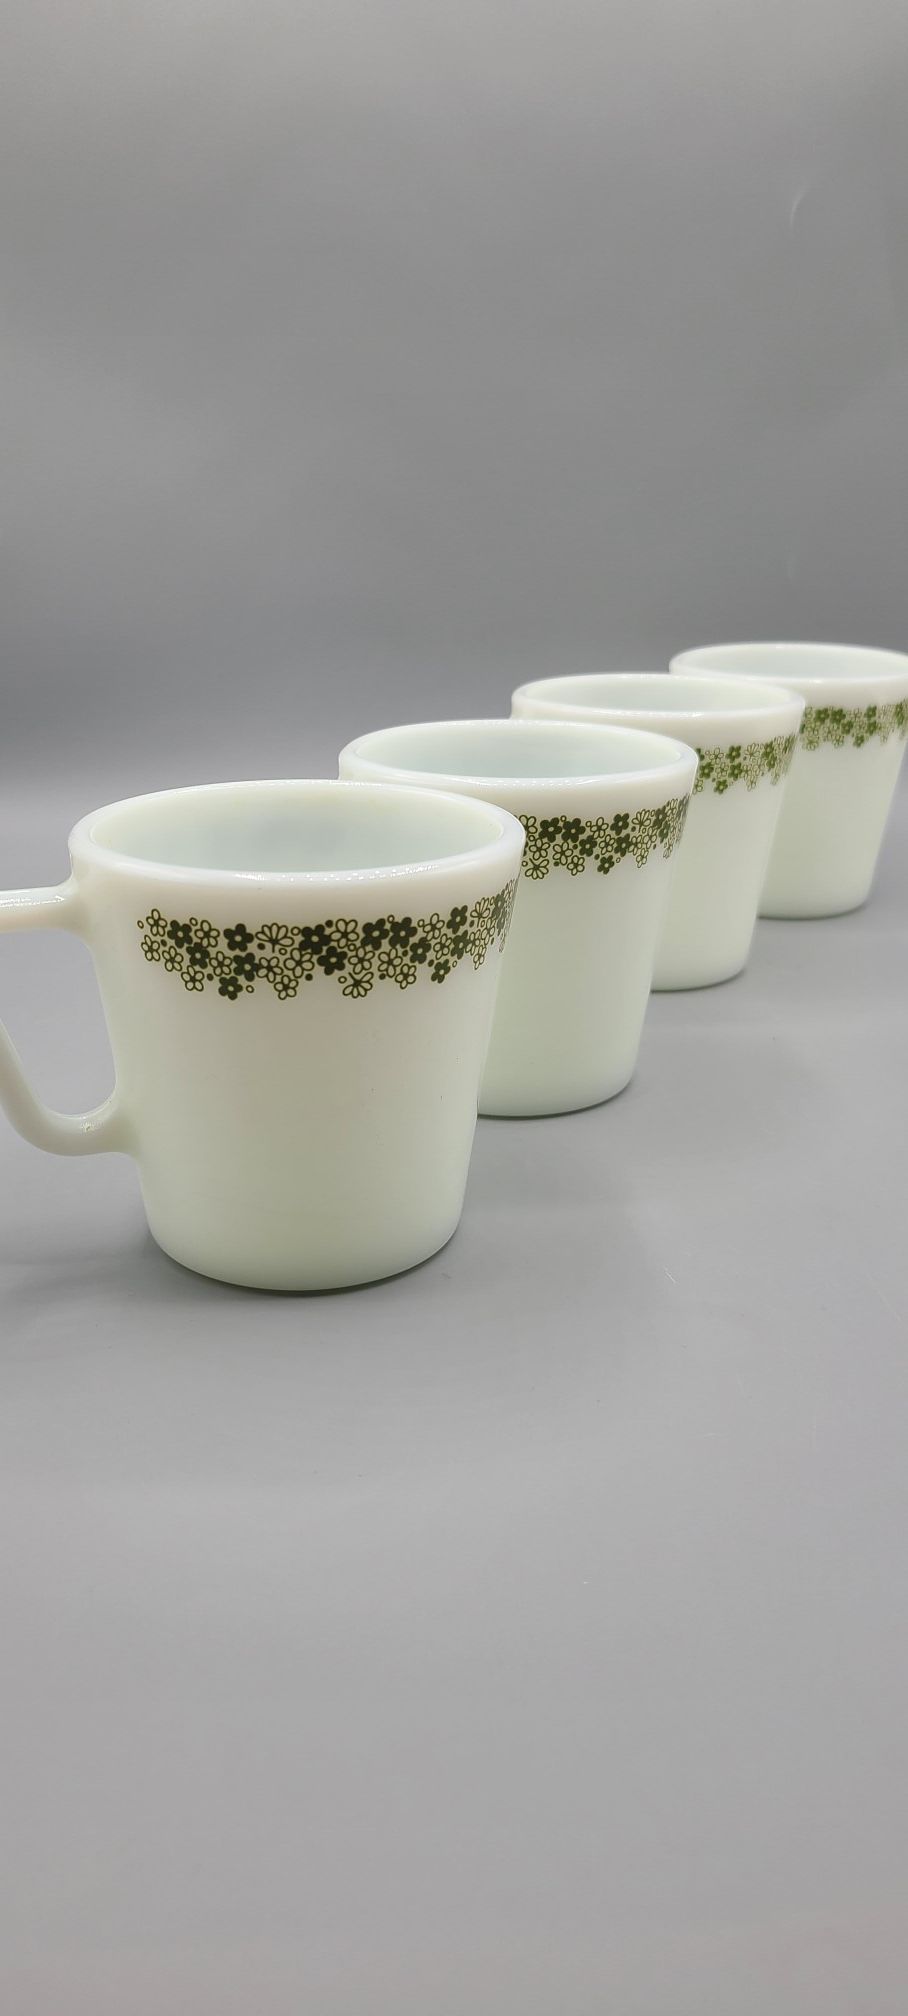 4 Vintage Pyrex Spring Blossom Coffee Cups